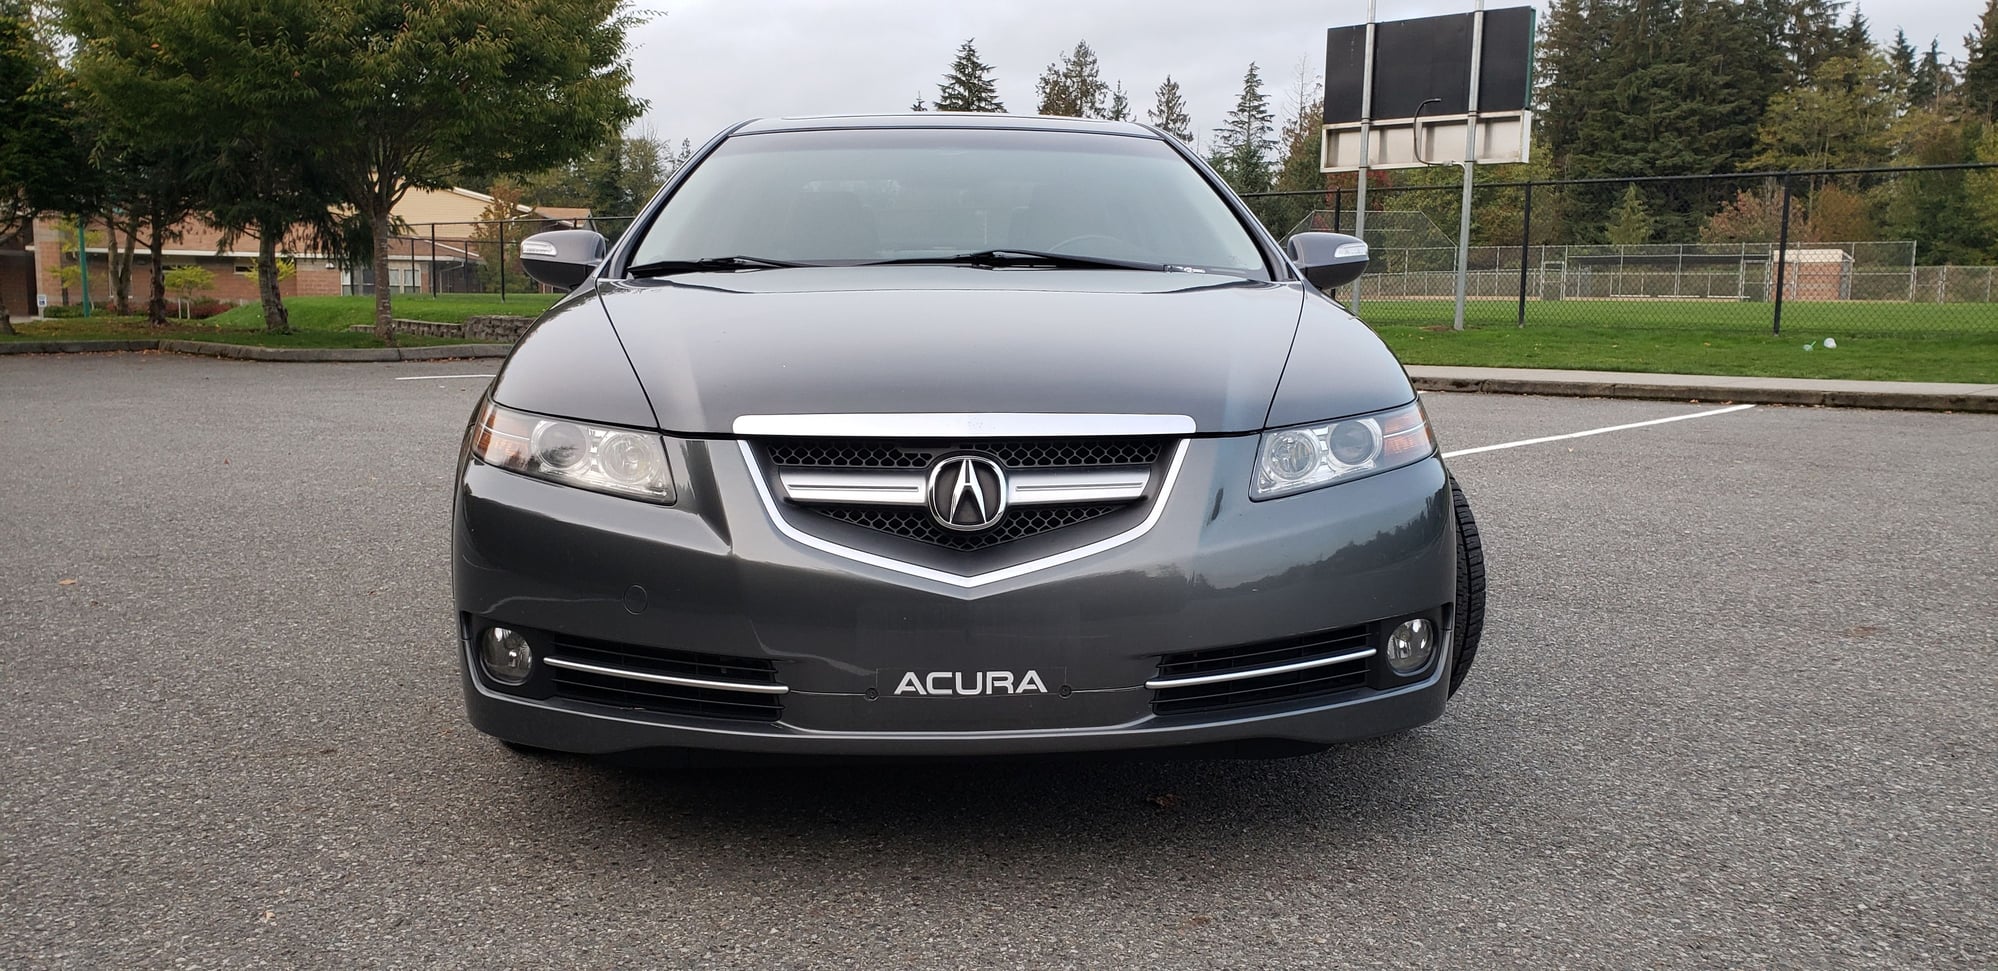 2008 Acura TL - SOLD: Immaculate 2008 Acura TL w/Clean Carfax - $10250 (Seattle, WA-Local Only) - Used - VIN 19UUA66268A011683 - 64,000 Miles - 6 cyl - 2WD - Automatic - Sedan - Gray - Snohomish, WA 98290, United States